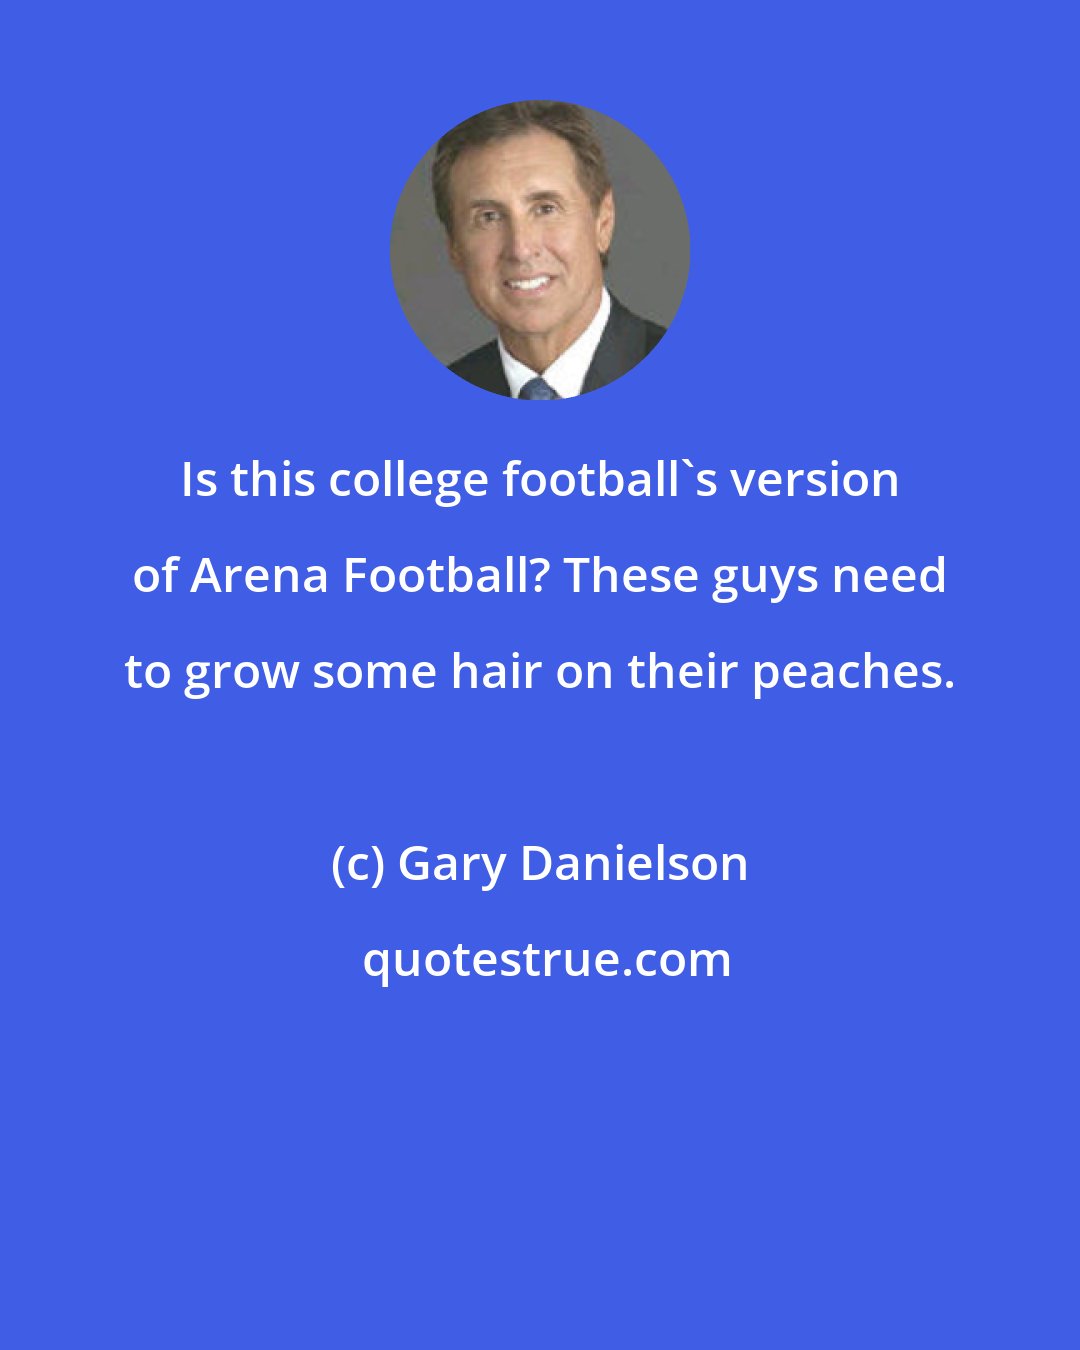 Gary Danielson: Is this college football's version of Arena Football? These guys need to grow some hair on their peaches.